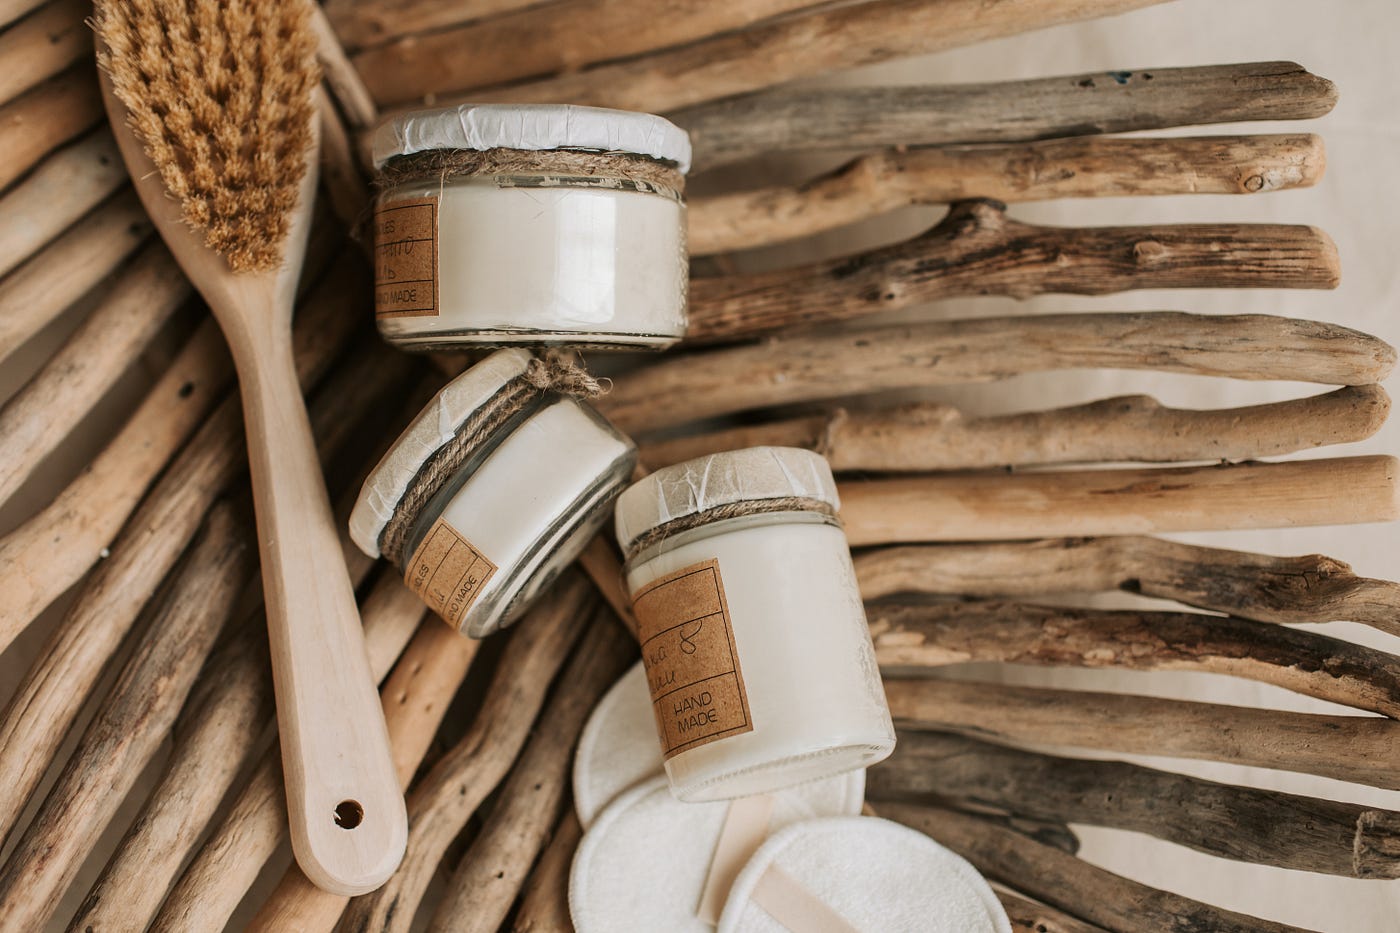 Sustainable Packaging is Natural Fit for Eco-conscious Beauty Brands